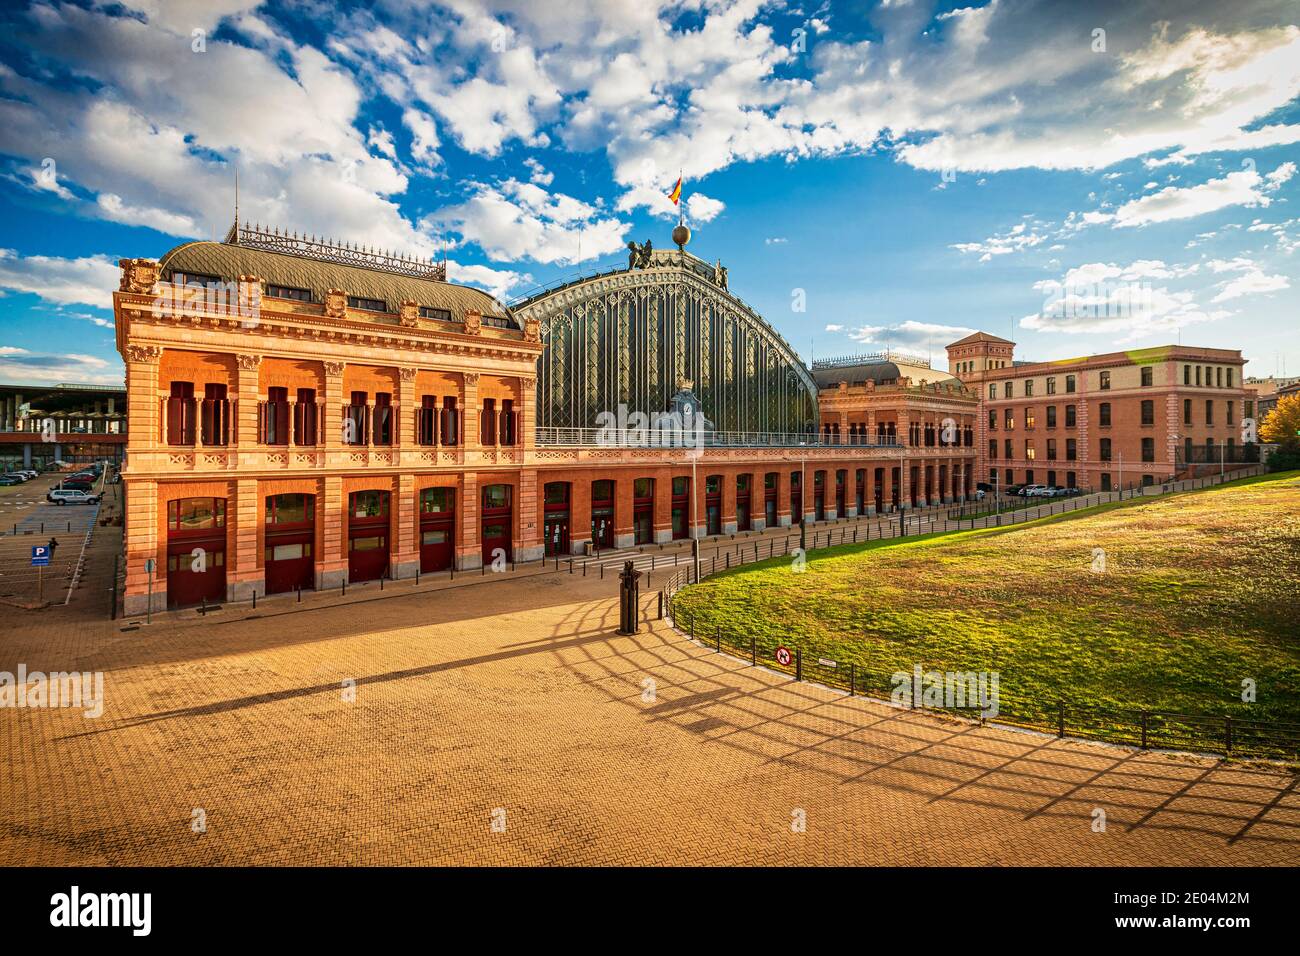 Madrid, Spain - October 15, 2020: Atocha train station in Madrid, Spain on a sunny autumn afternoon. Stock Photo